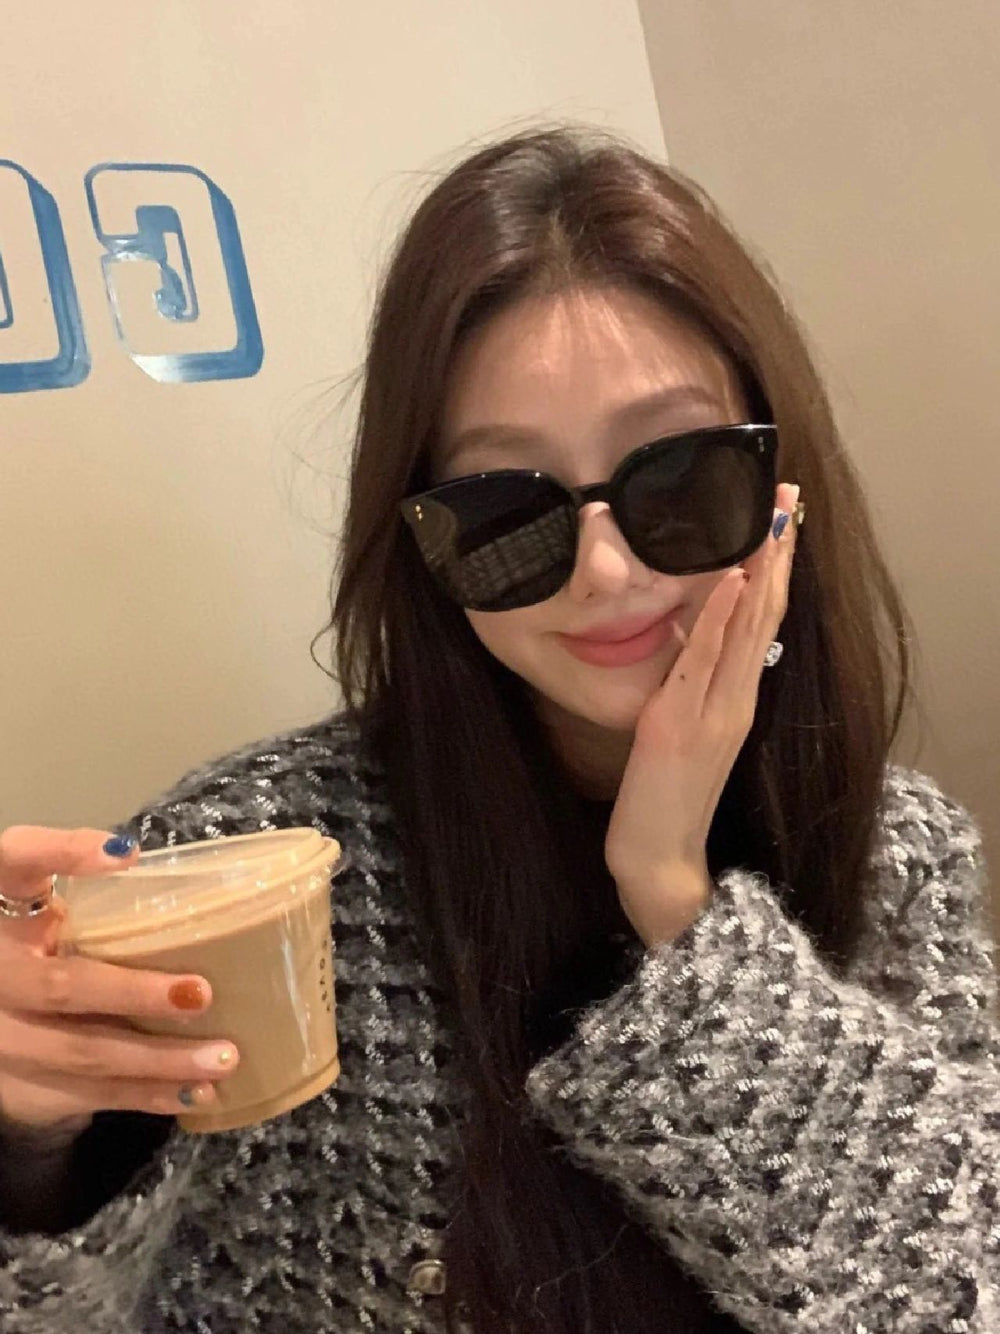 A stylish woman wearing fashionable sunglasses and holding a cup.